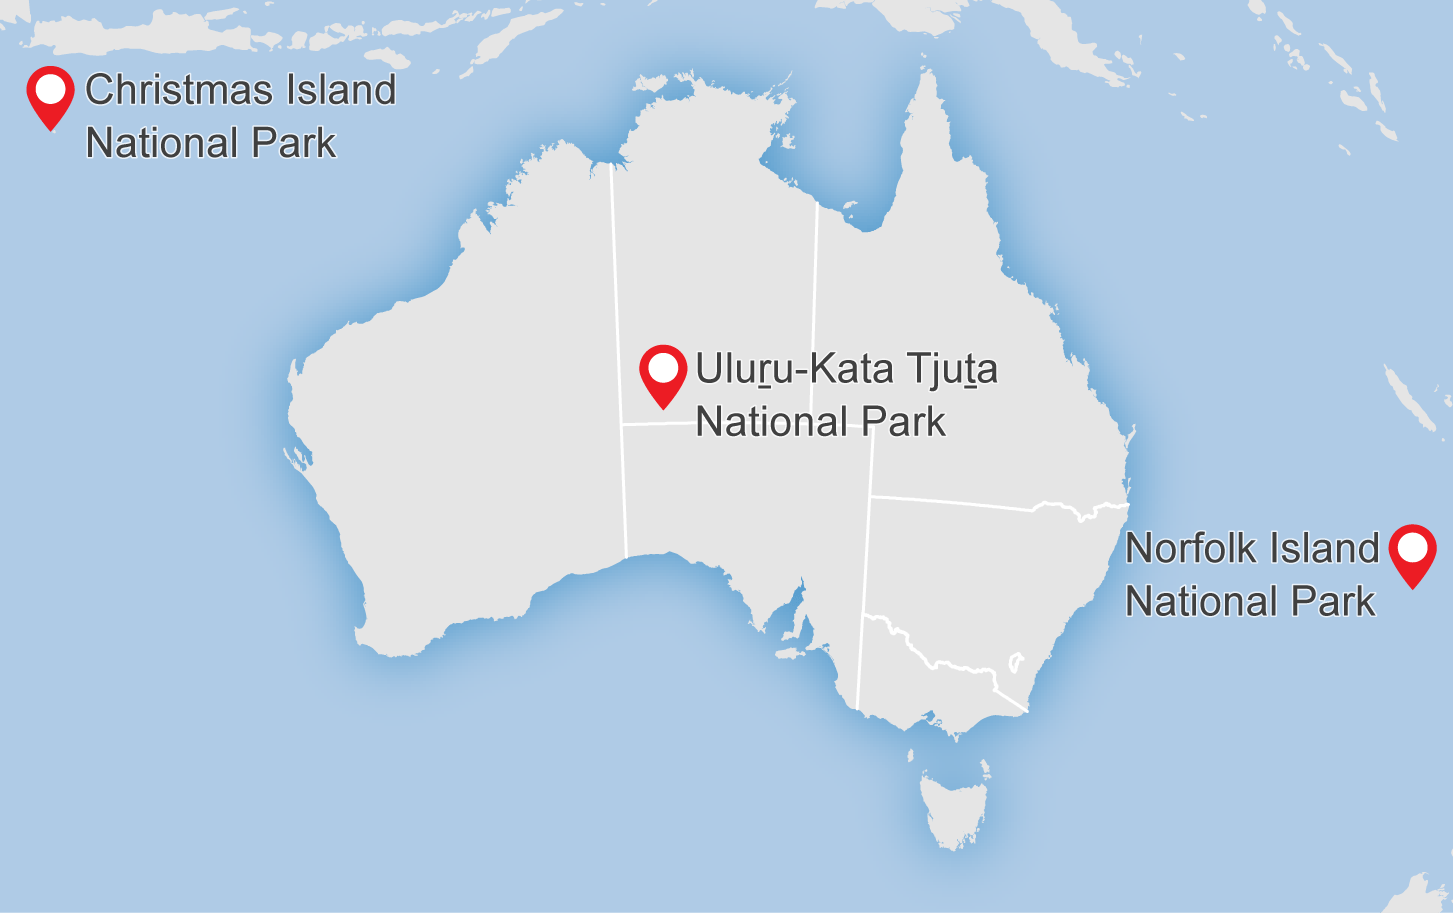 Map showing the location of 3 national parks